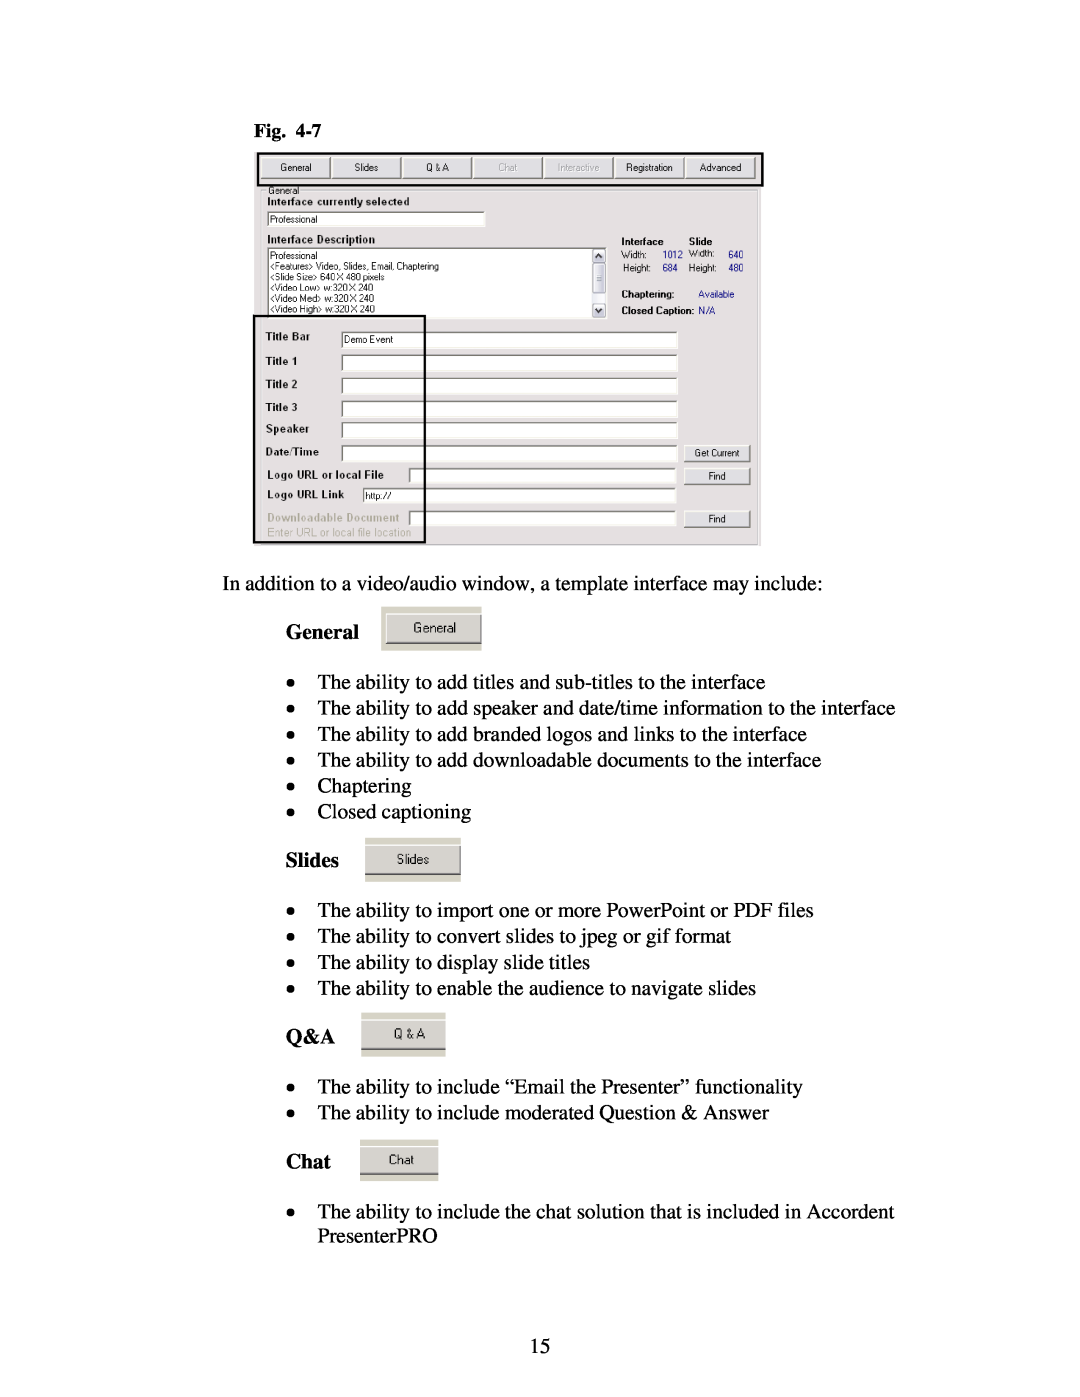 Polycom 6.1 user manual General, Chat, In addition to a video/audio window, a template interface may include, Slides 